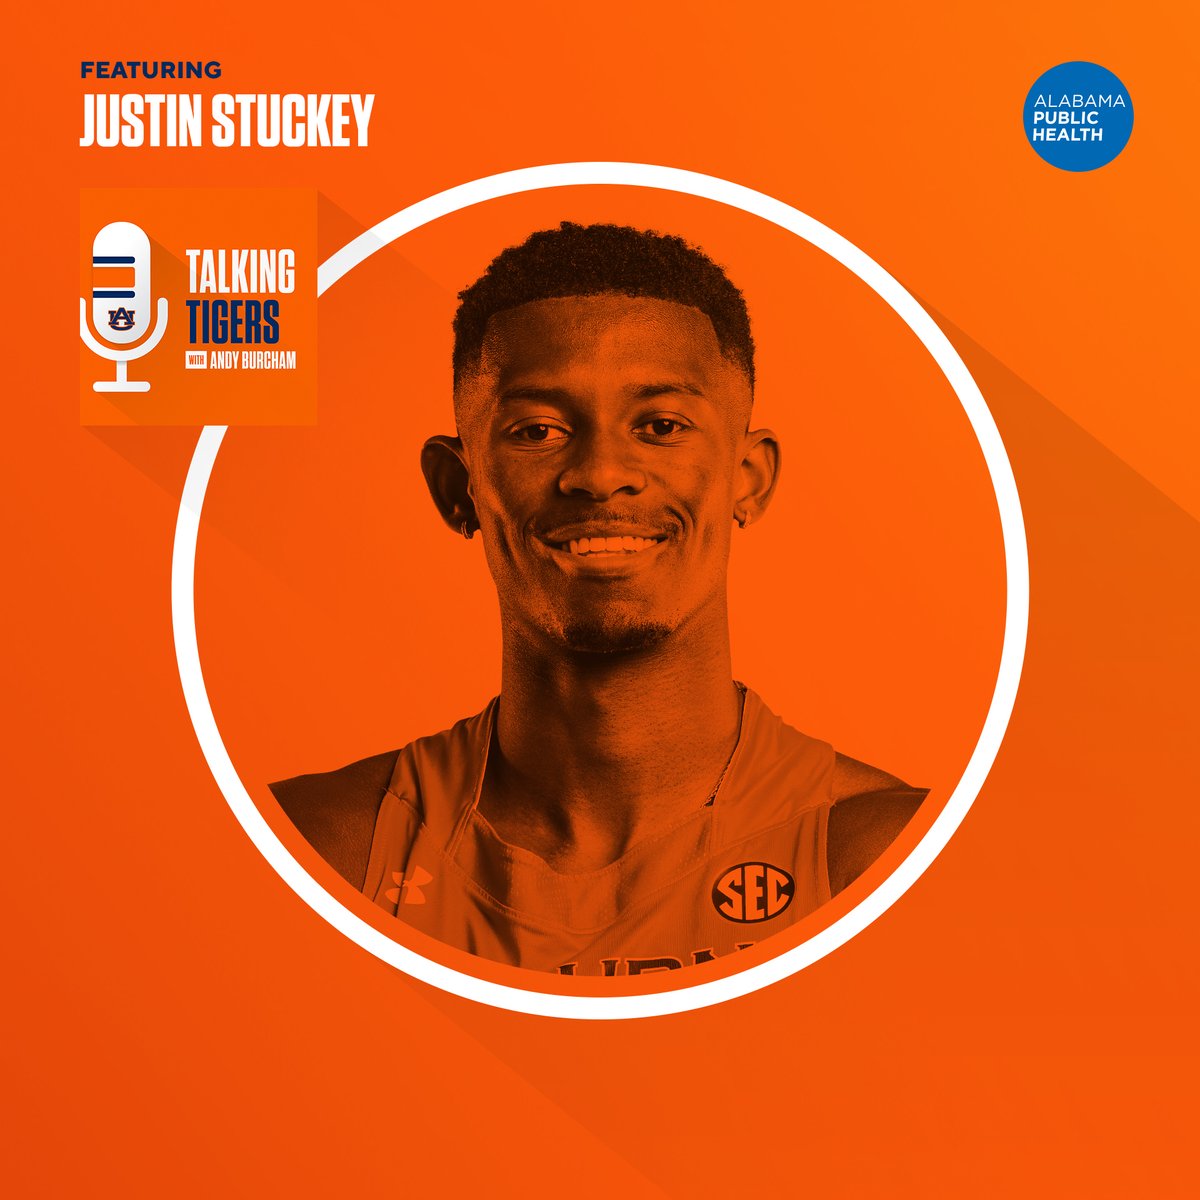 The Talking Tigers Podcast with @aburcham, Presented by @ALPublicHealth, features @AuburnTFXC High Jumper Justin Stuckey. He talks about his rise in the media featuring College Game Day and the Final Four. Justin Stuckey on the Talking Tigers Podcast, Monday morning.